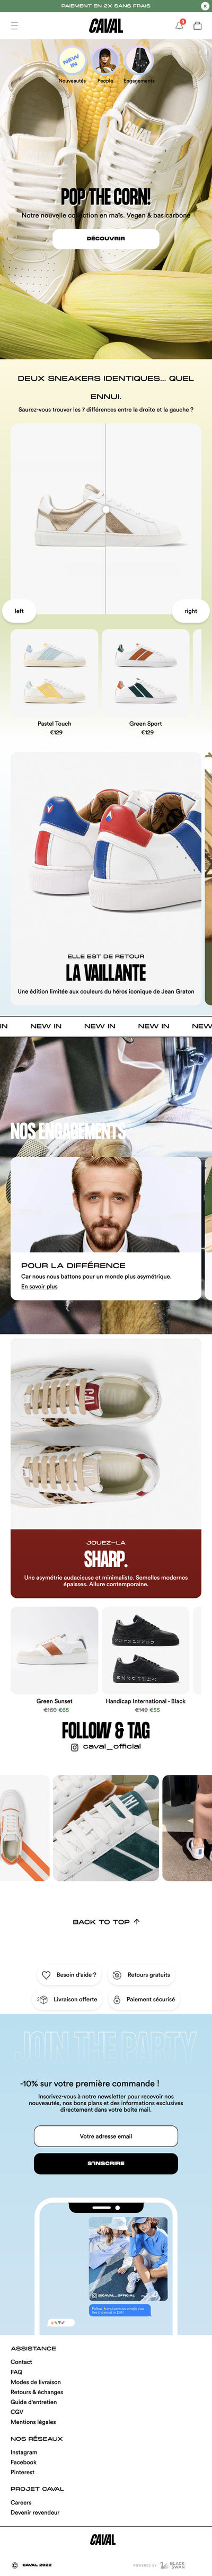 Caval - Homepage - Mobile